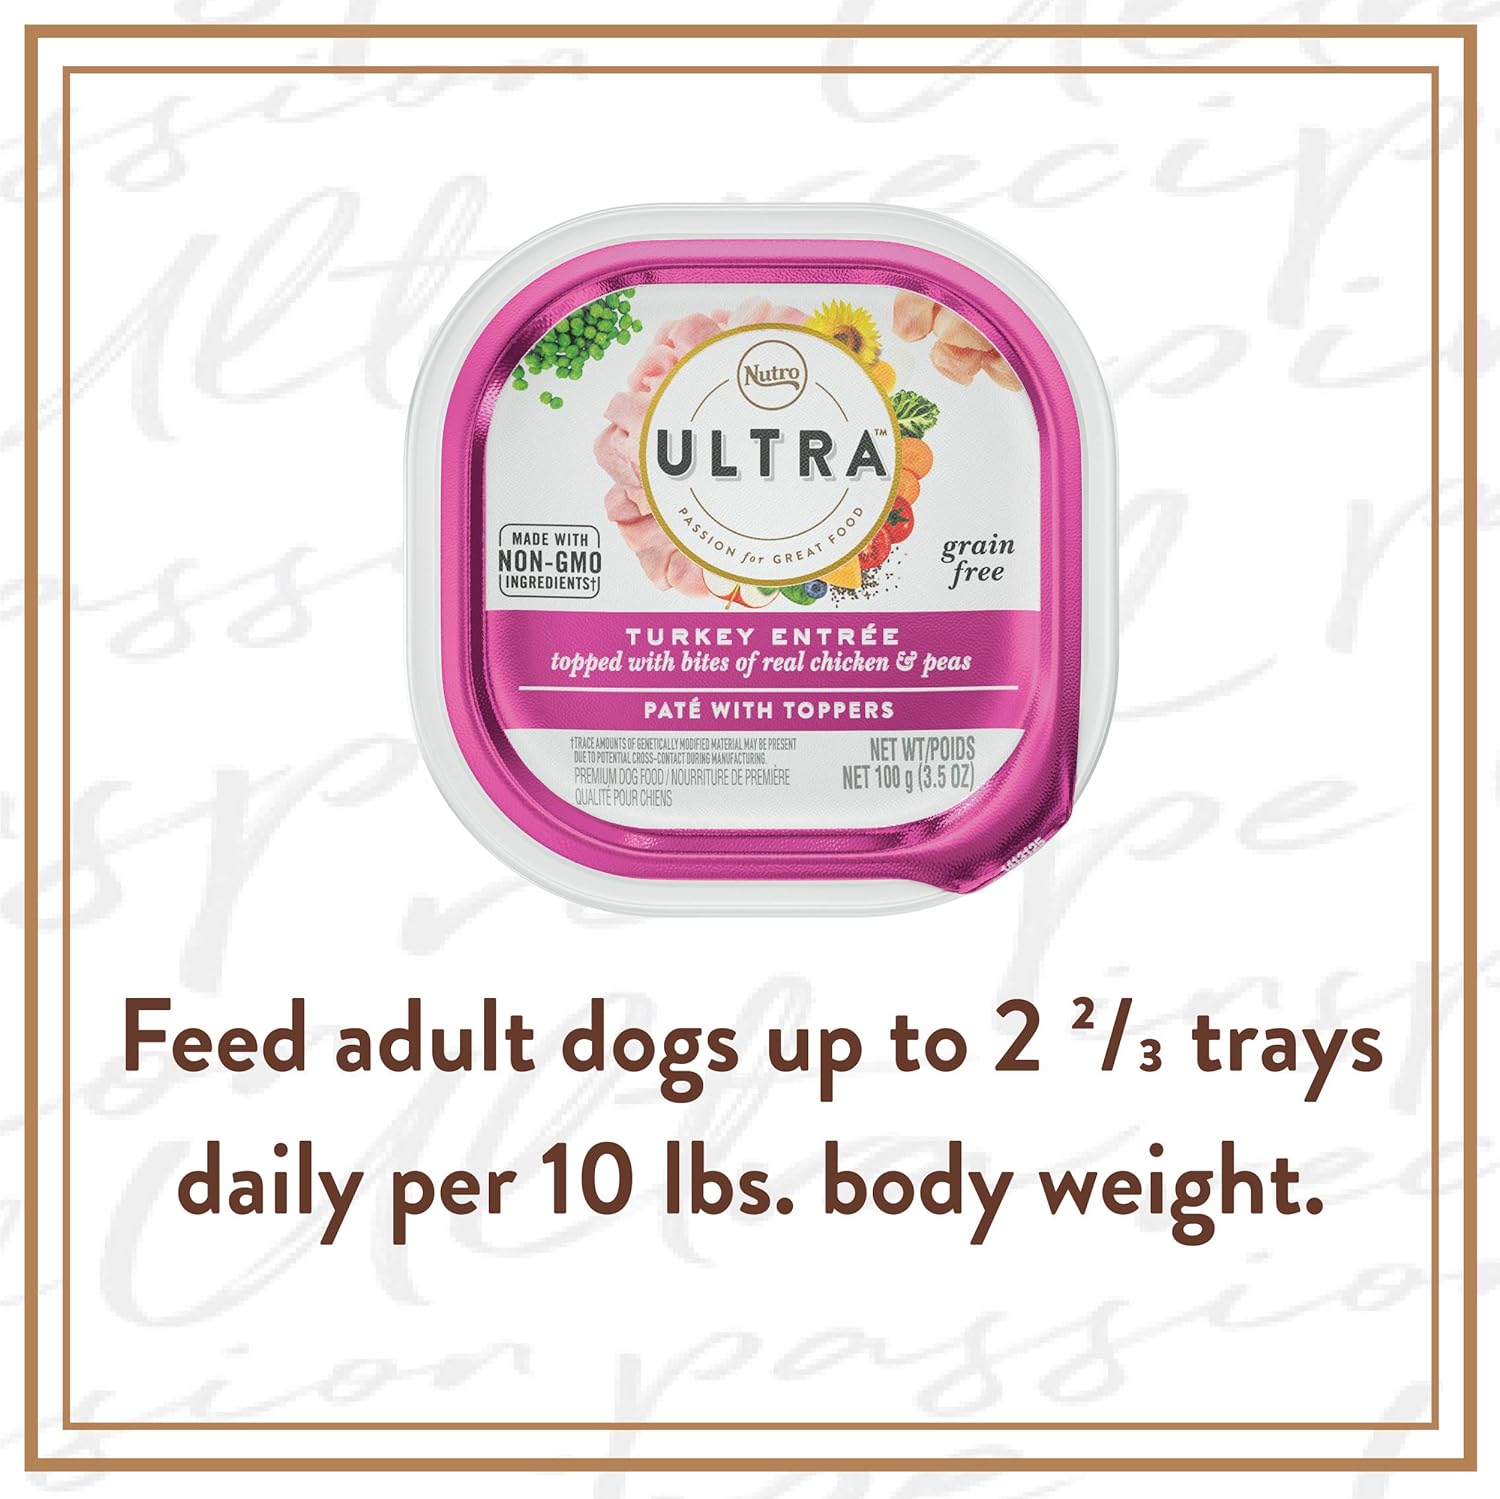 NUTRO ULTRA Grain Free Adult Soft Wet Dog Food Paté With Toppers Turkey Entrée topped with bites of real chicken & peas, 3.5 oz. Trays, Pack of 24 : Pet Supplies